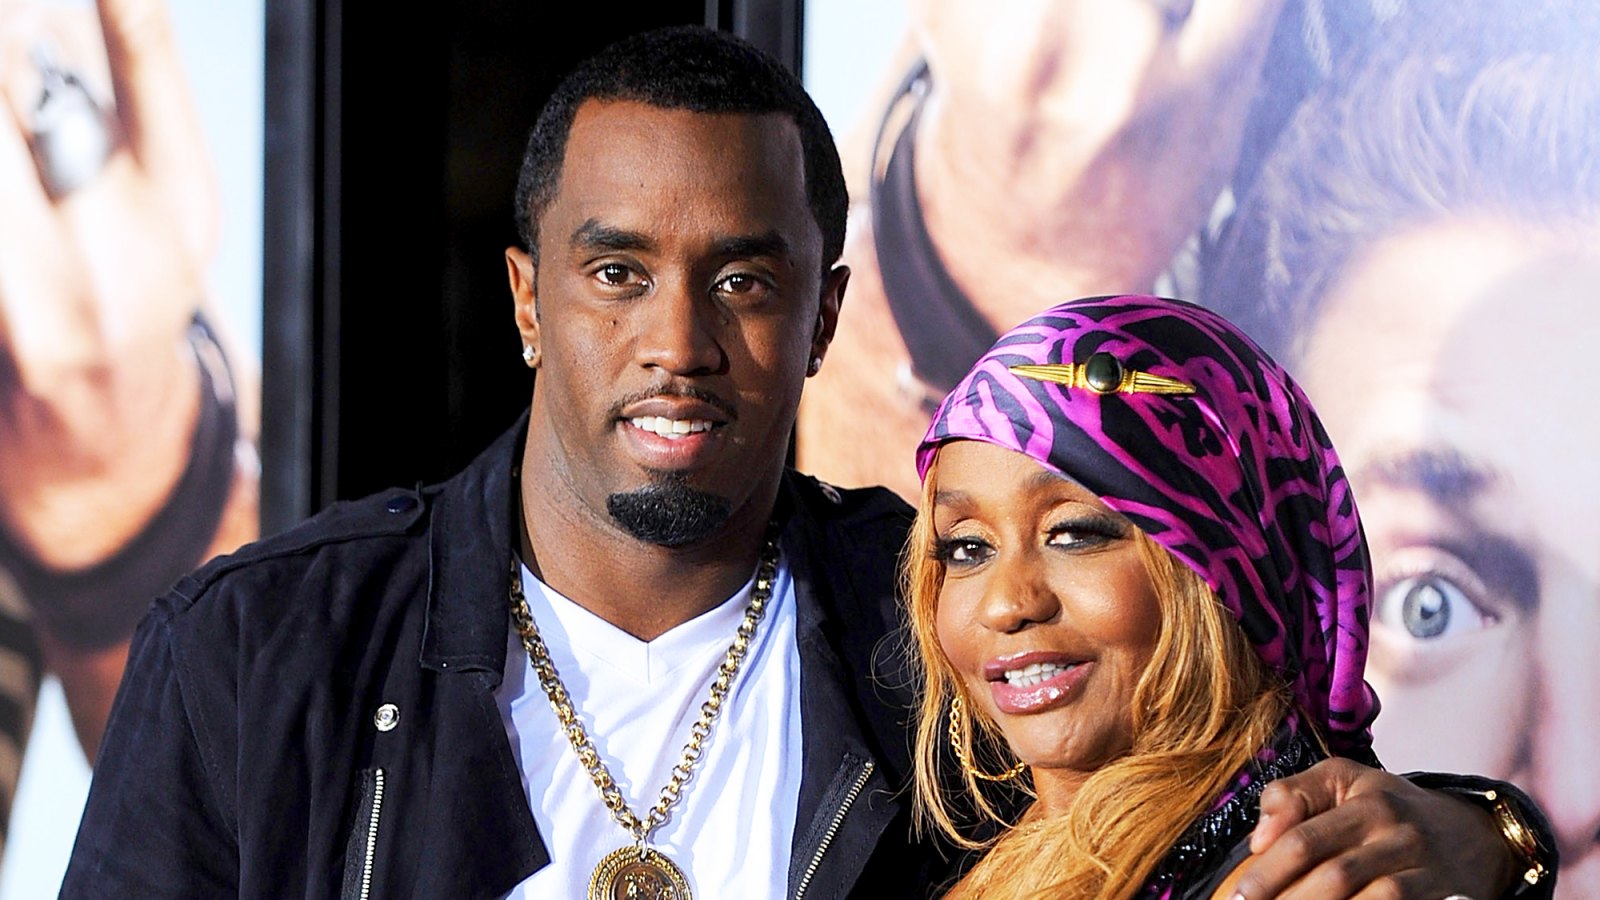 Sean 'Diddy' Combs and his mother Janice arrives at the 2010 premiere of "Get Him To The Greek" at the Greek Theatre in Los Angeles, California.